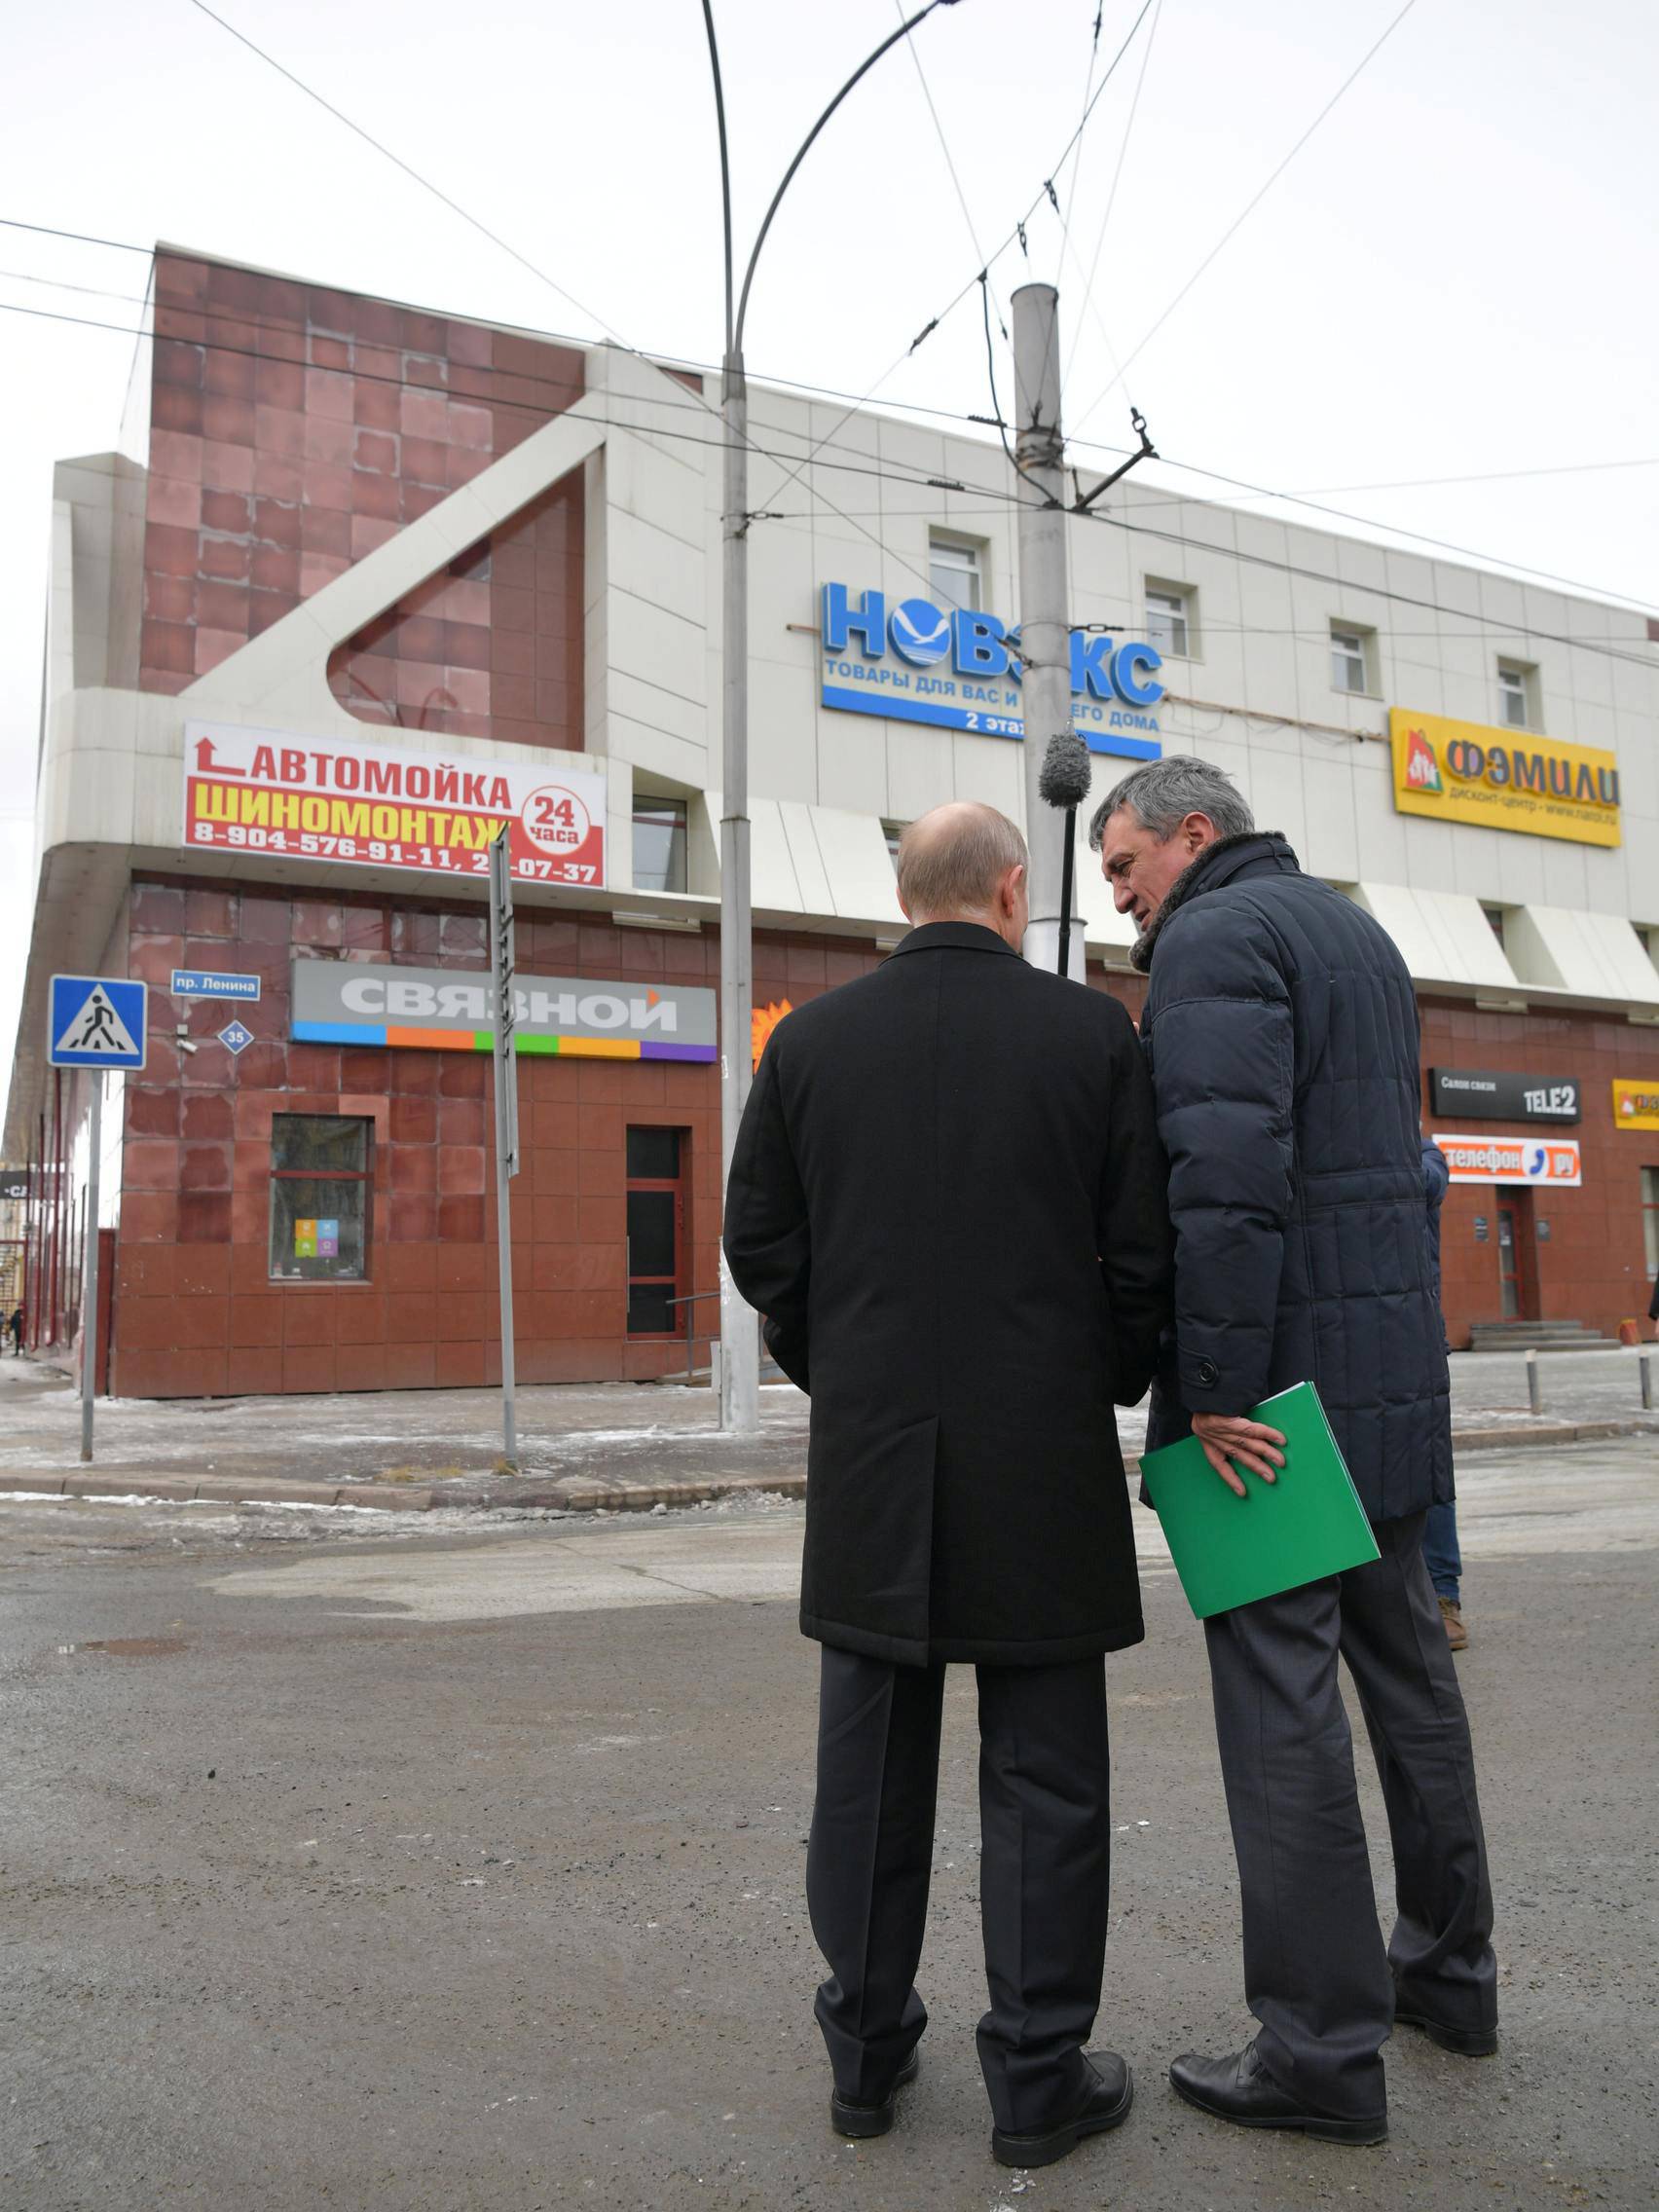 Russian President Vladimir Putin visits the site of fire, that killed at least 64 people at a busy shopping mall, in Kemerovo